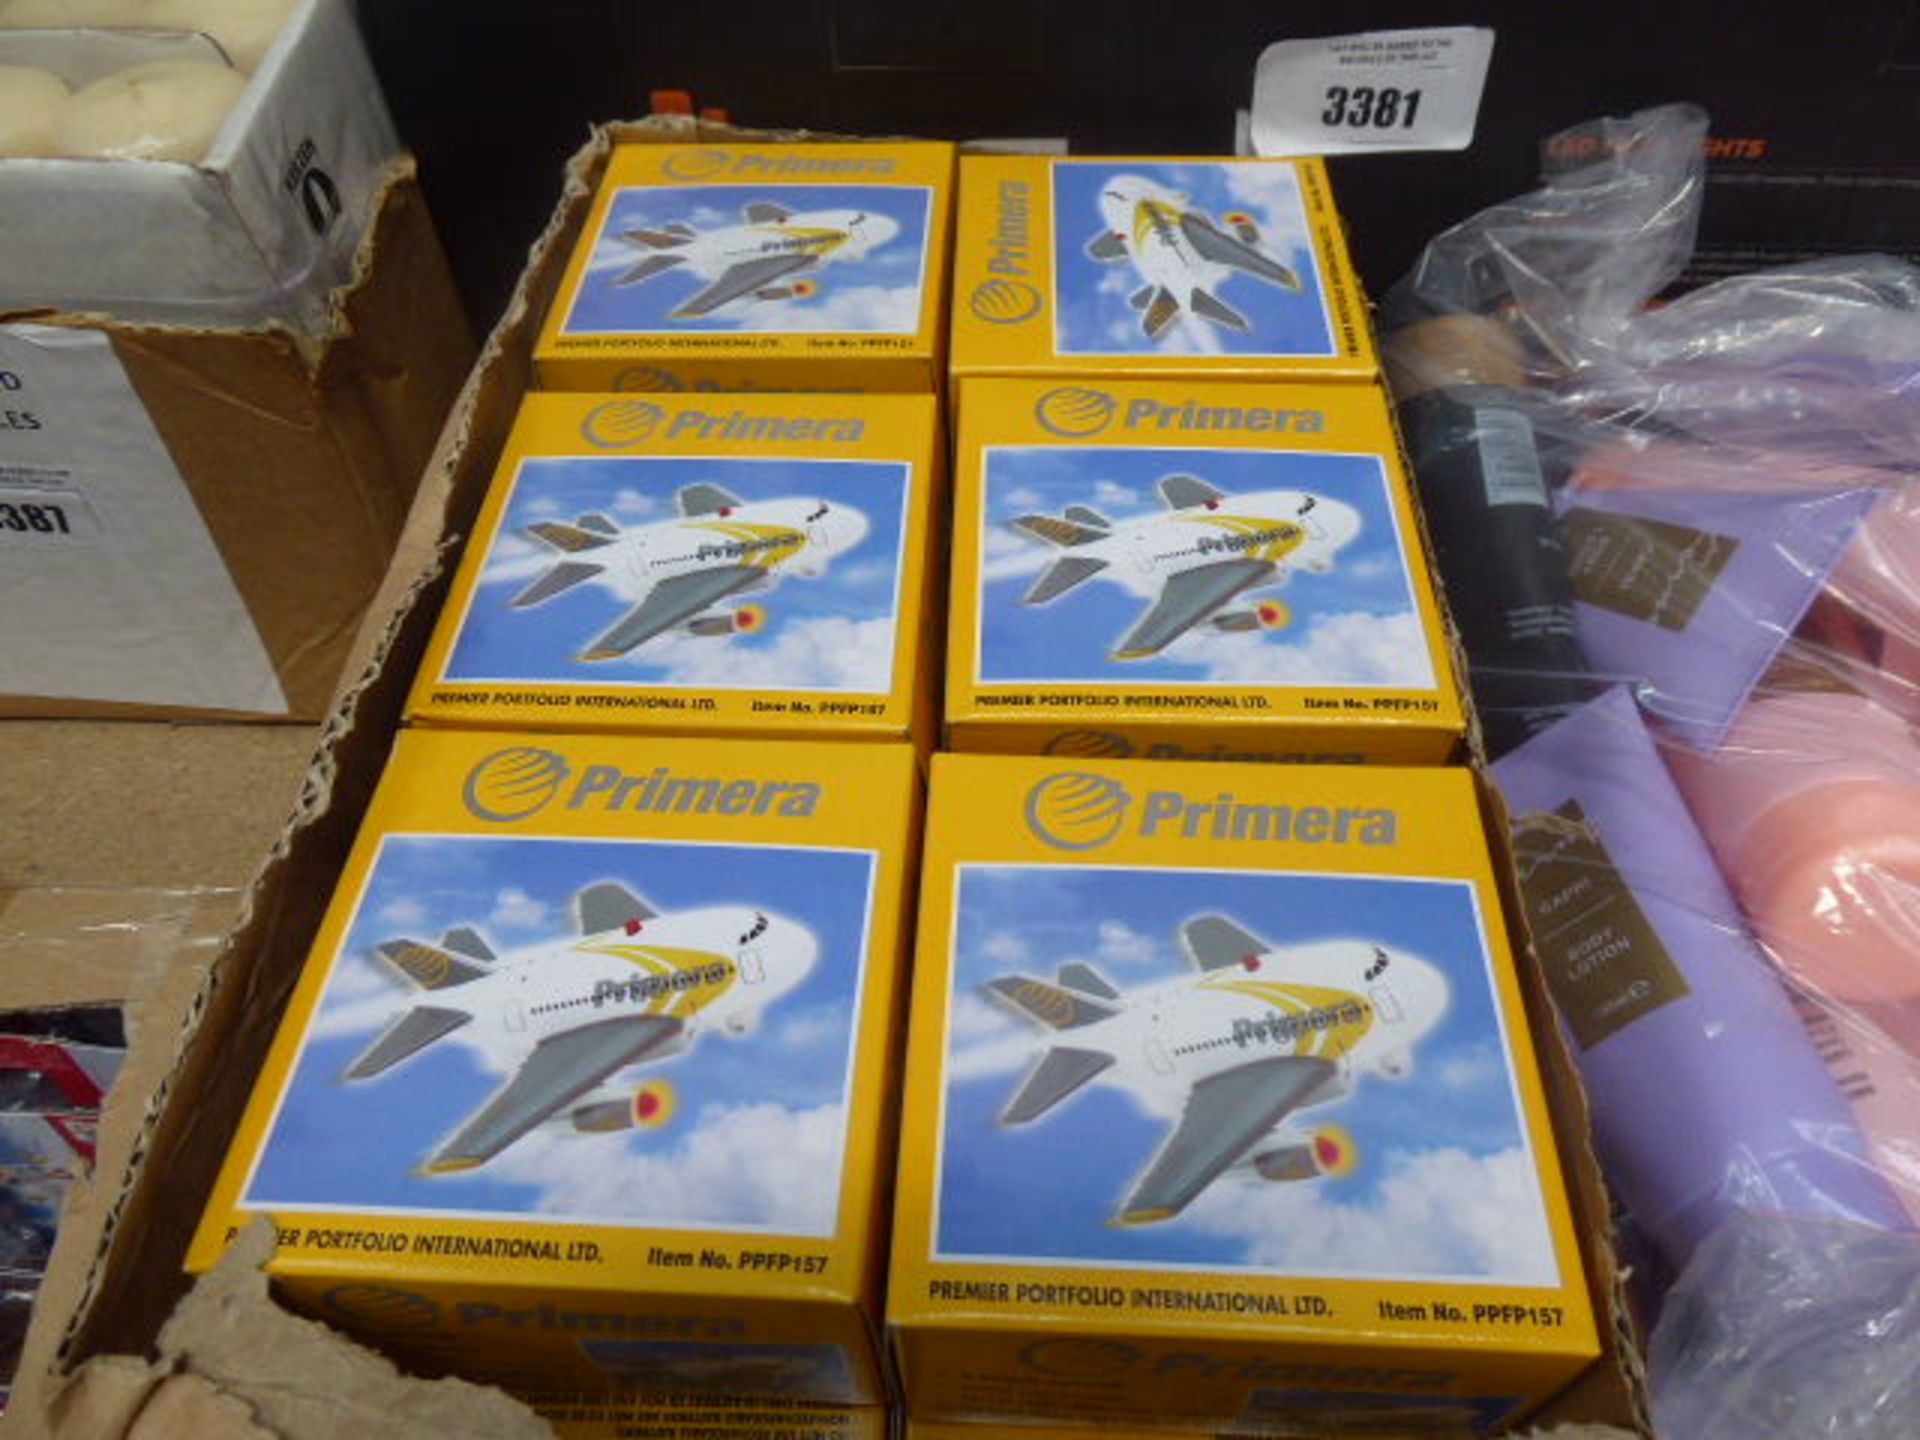 18 toy planes with flashing LED lights, batteries included